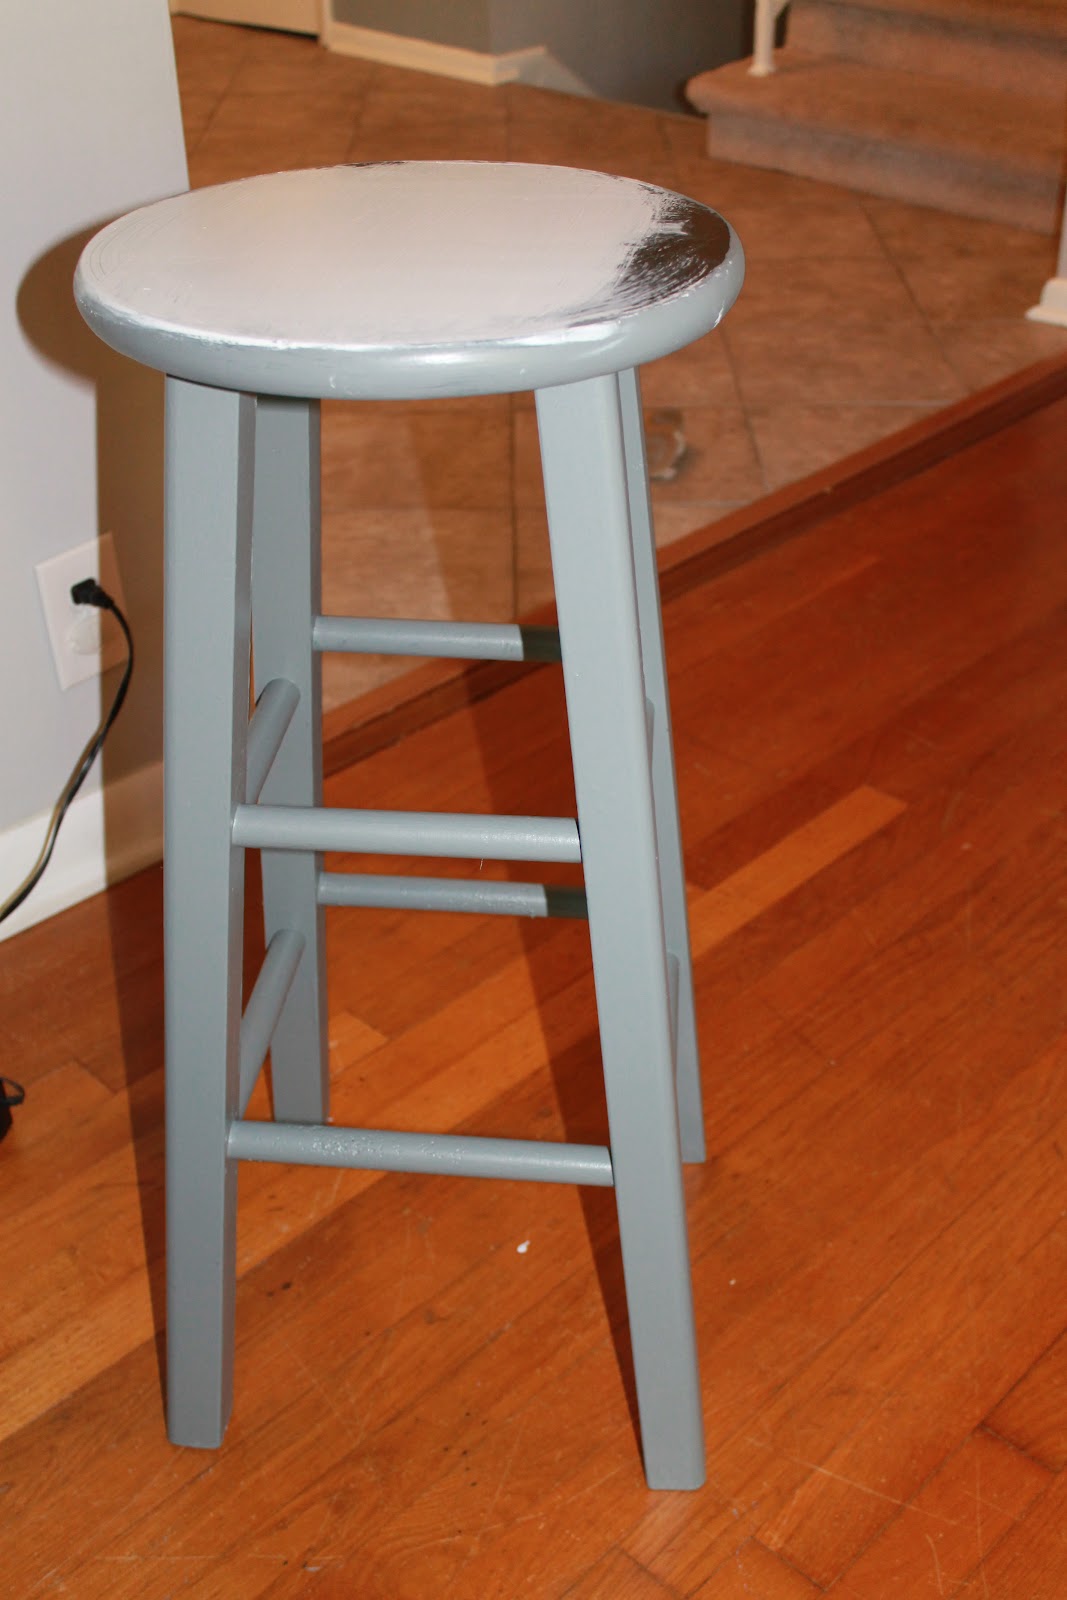 Just for Me...and You: Numbered Kitchen Stools